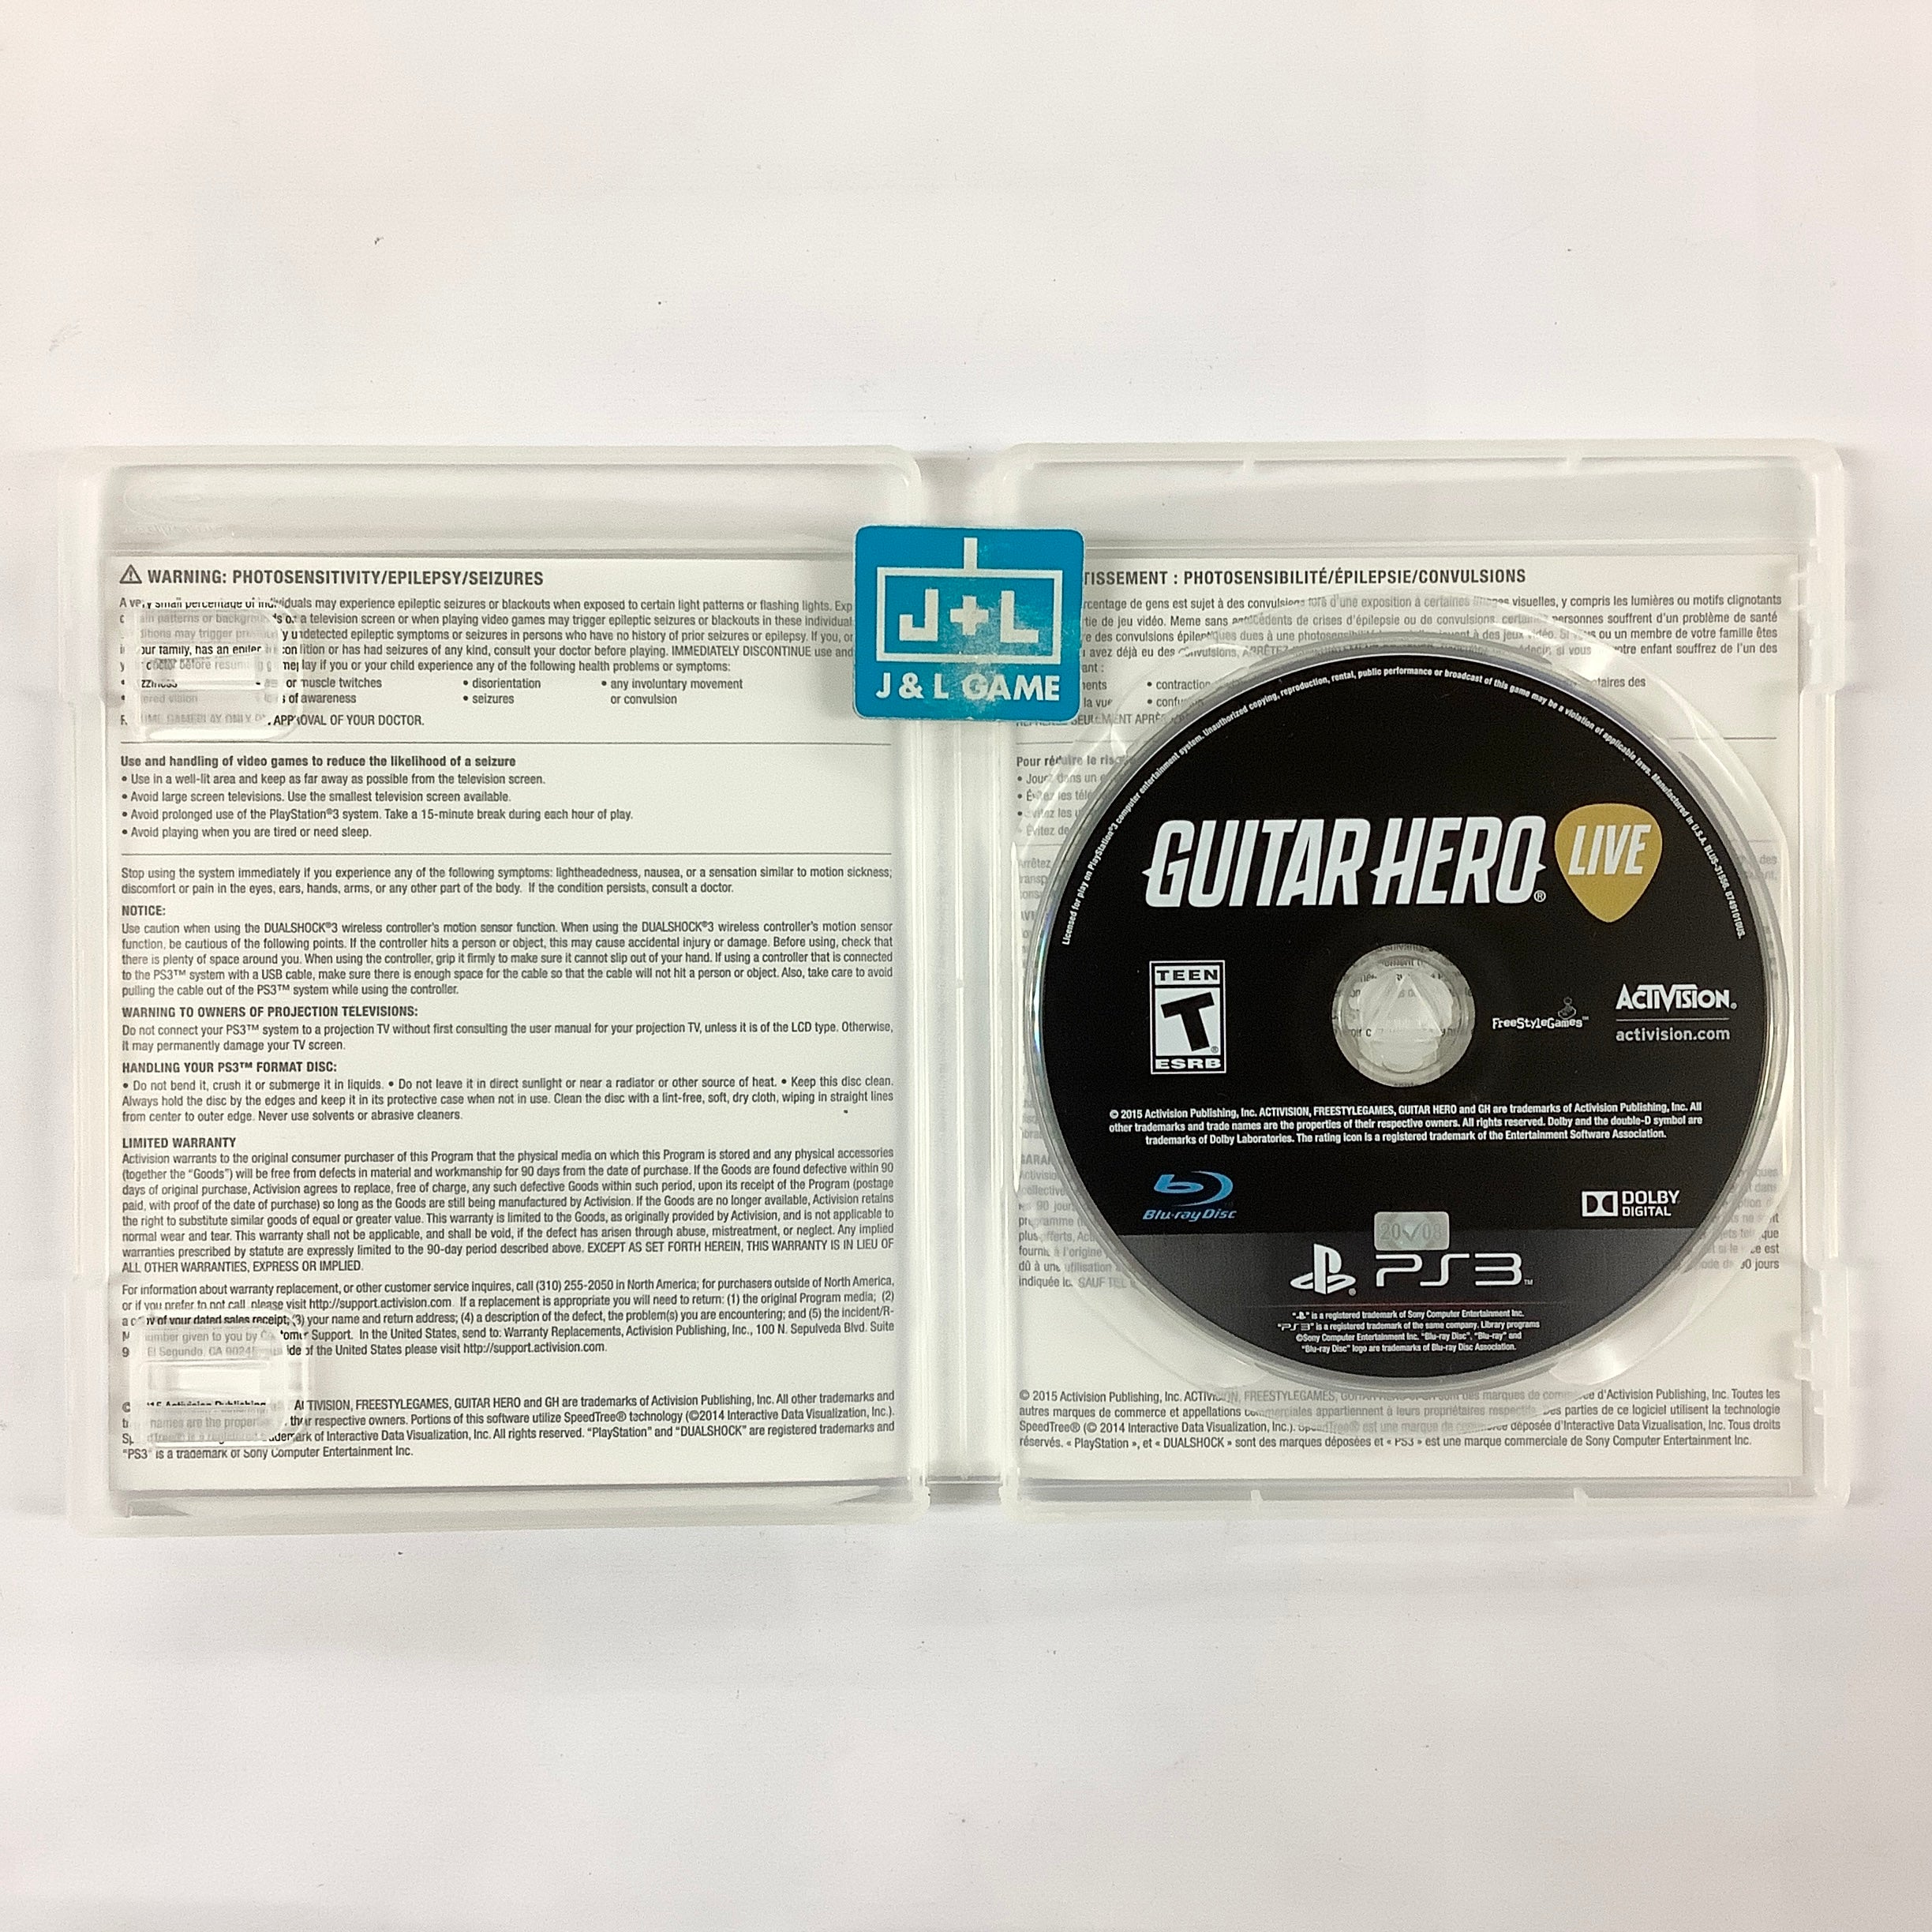 Guitar Hero Live (Game Only) - (PS3) PlayStation 3 [Pre-Owned] Video Games Activision   